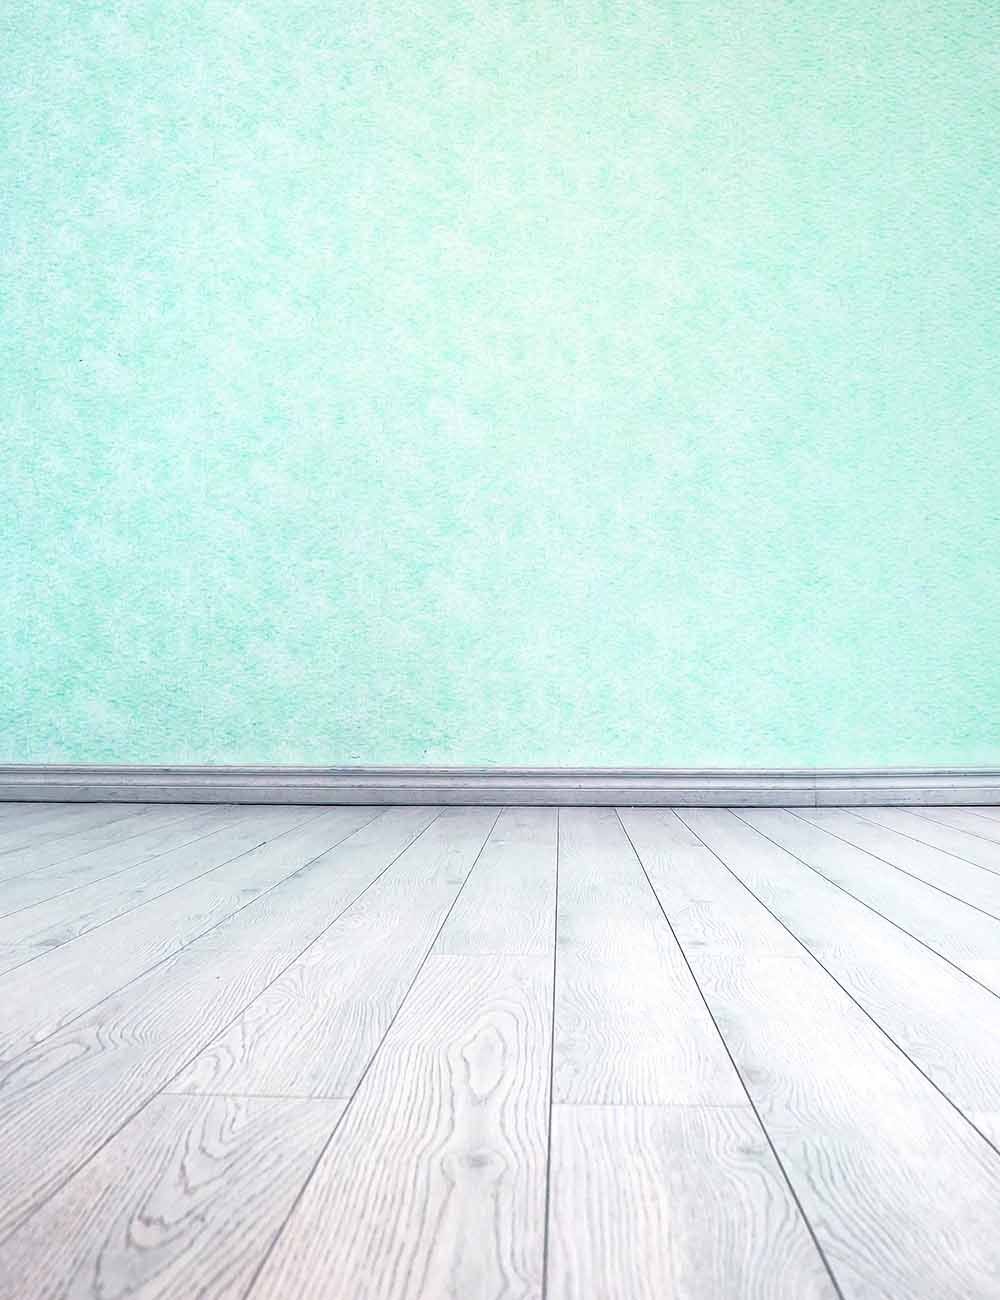 Spring Green Wall Background With Wood Floor For Studio Photo Shopbackdrop